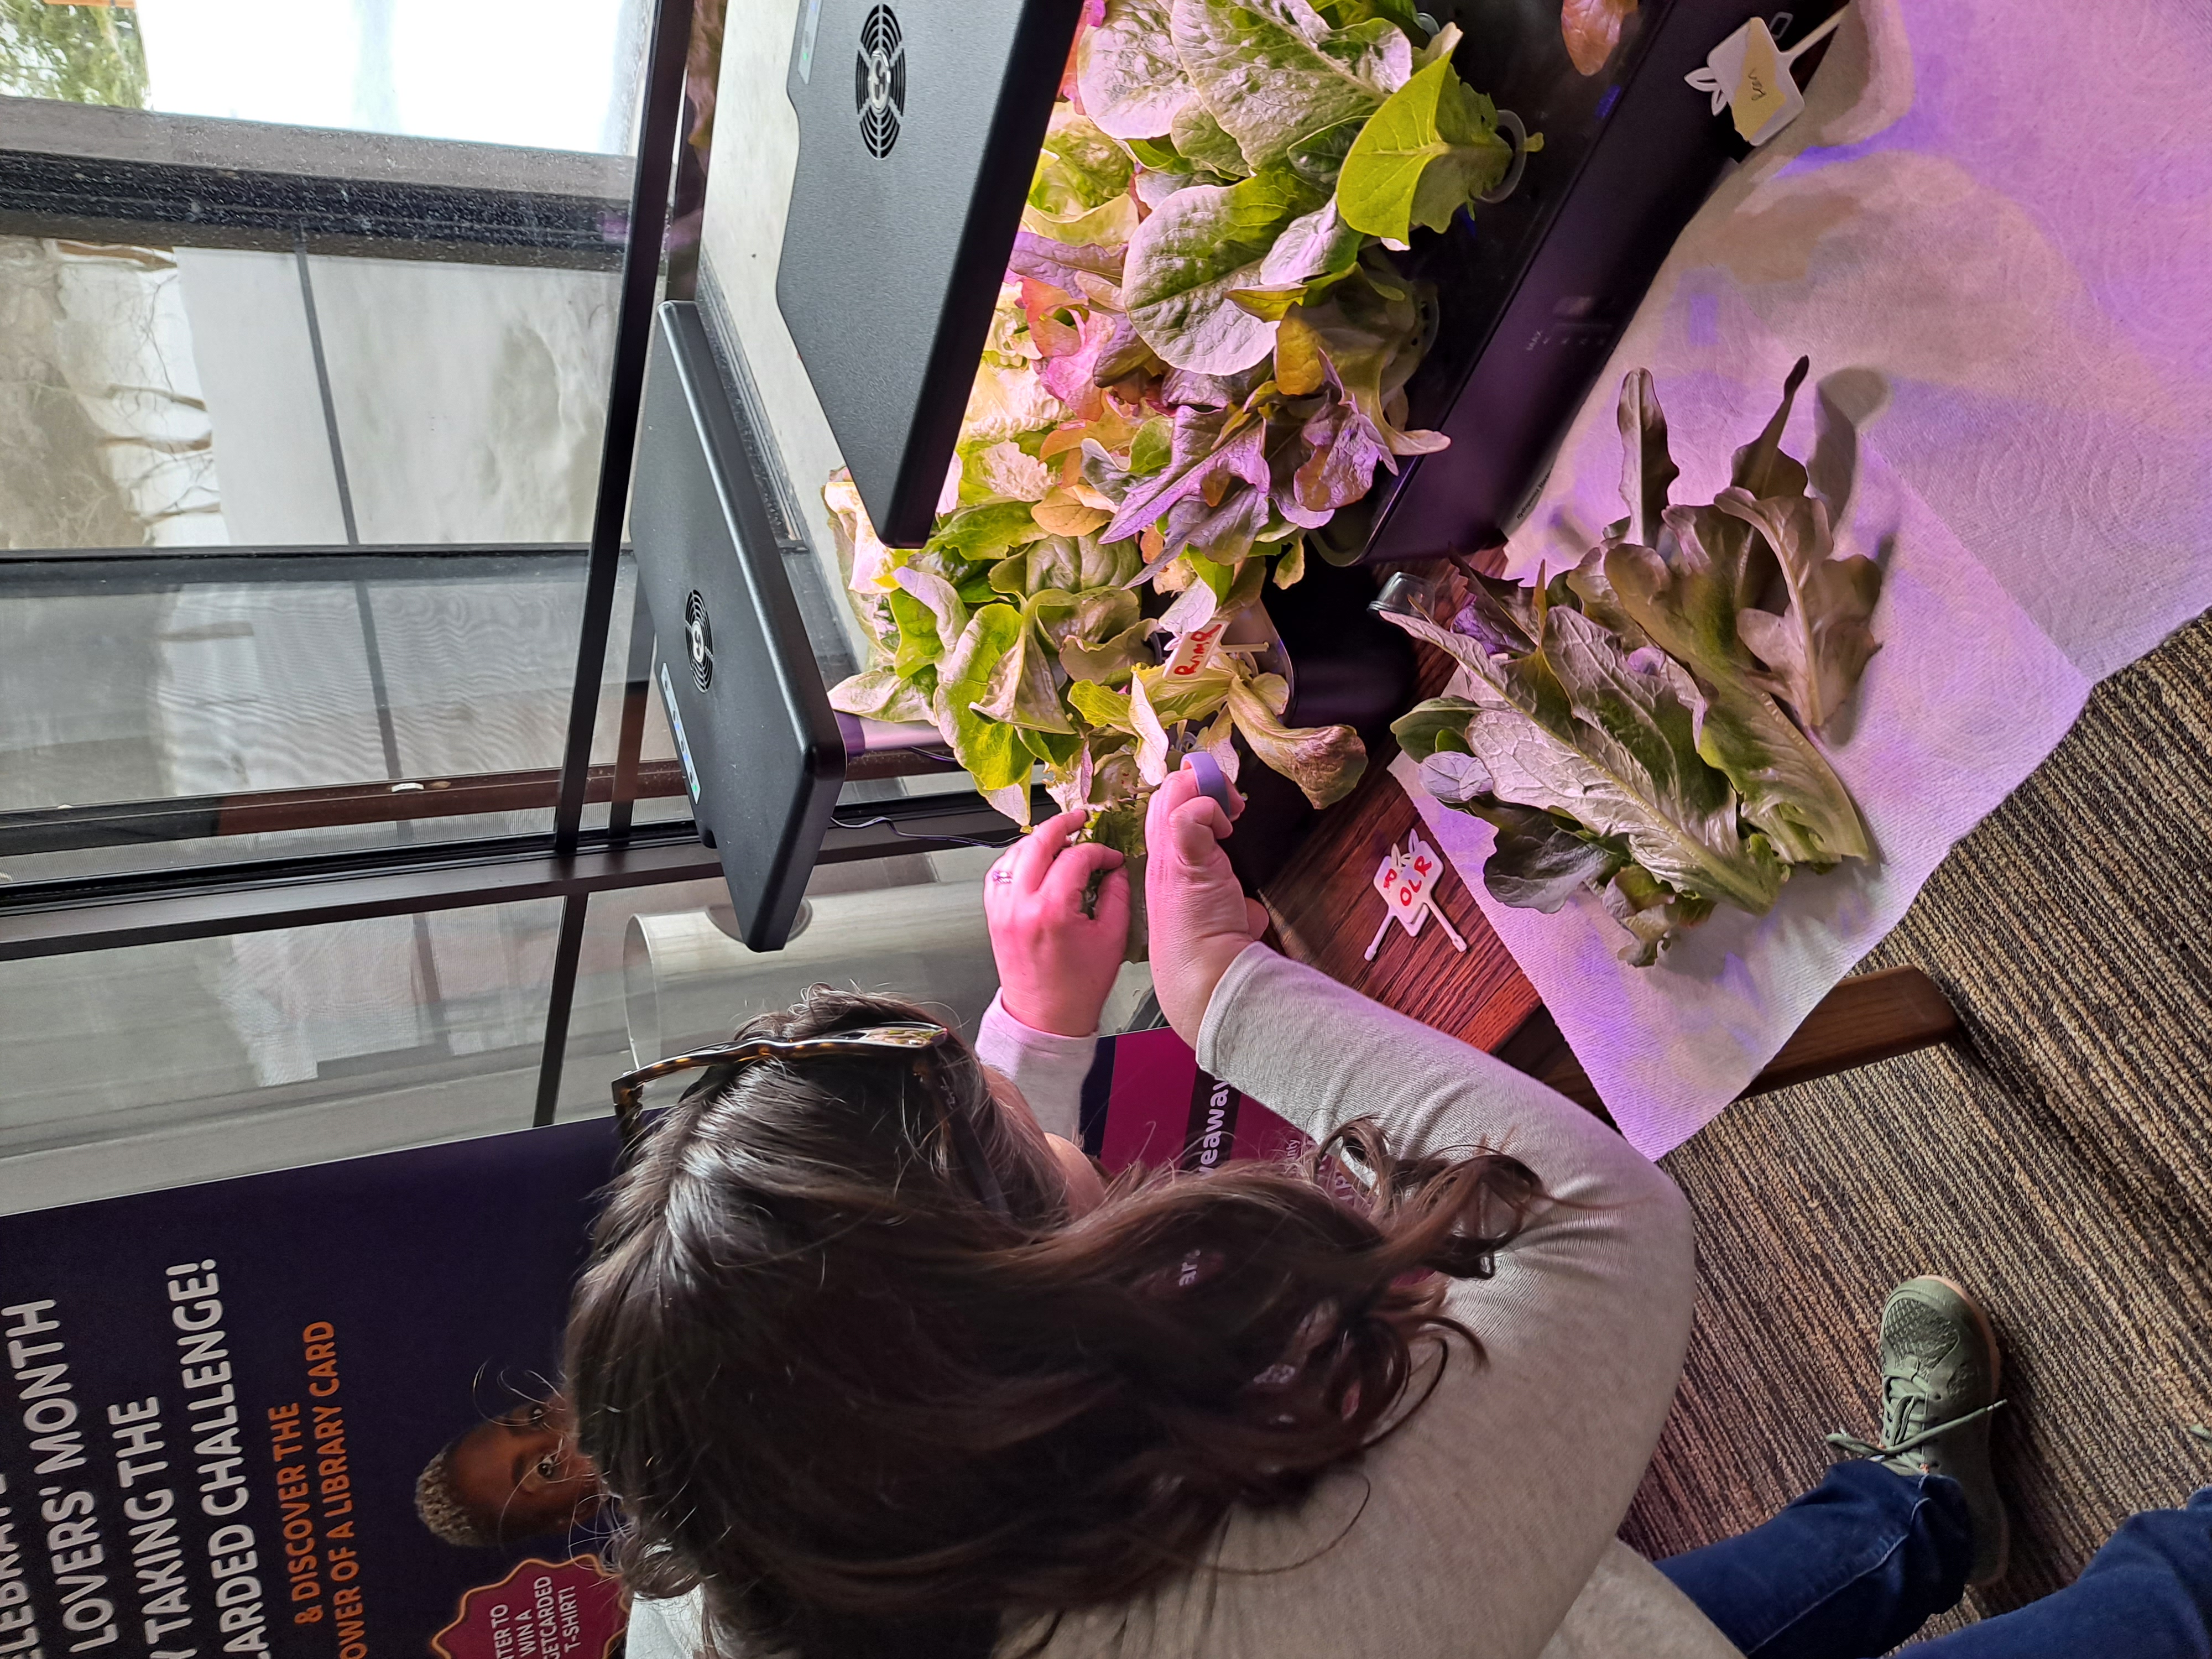 Hydroponic gardening at Las Vegas-Clark County Libraries